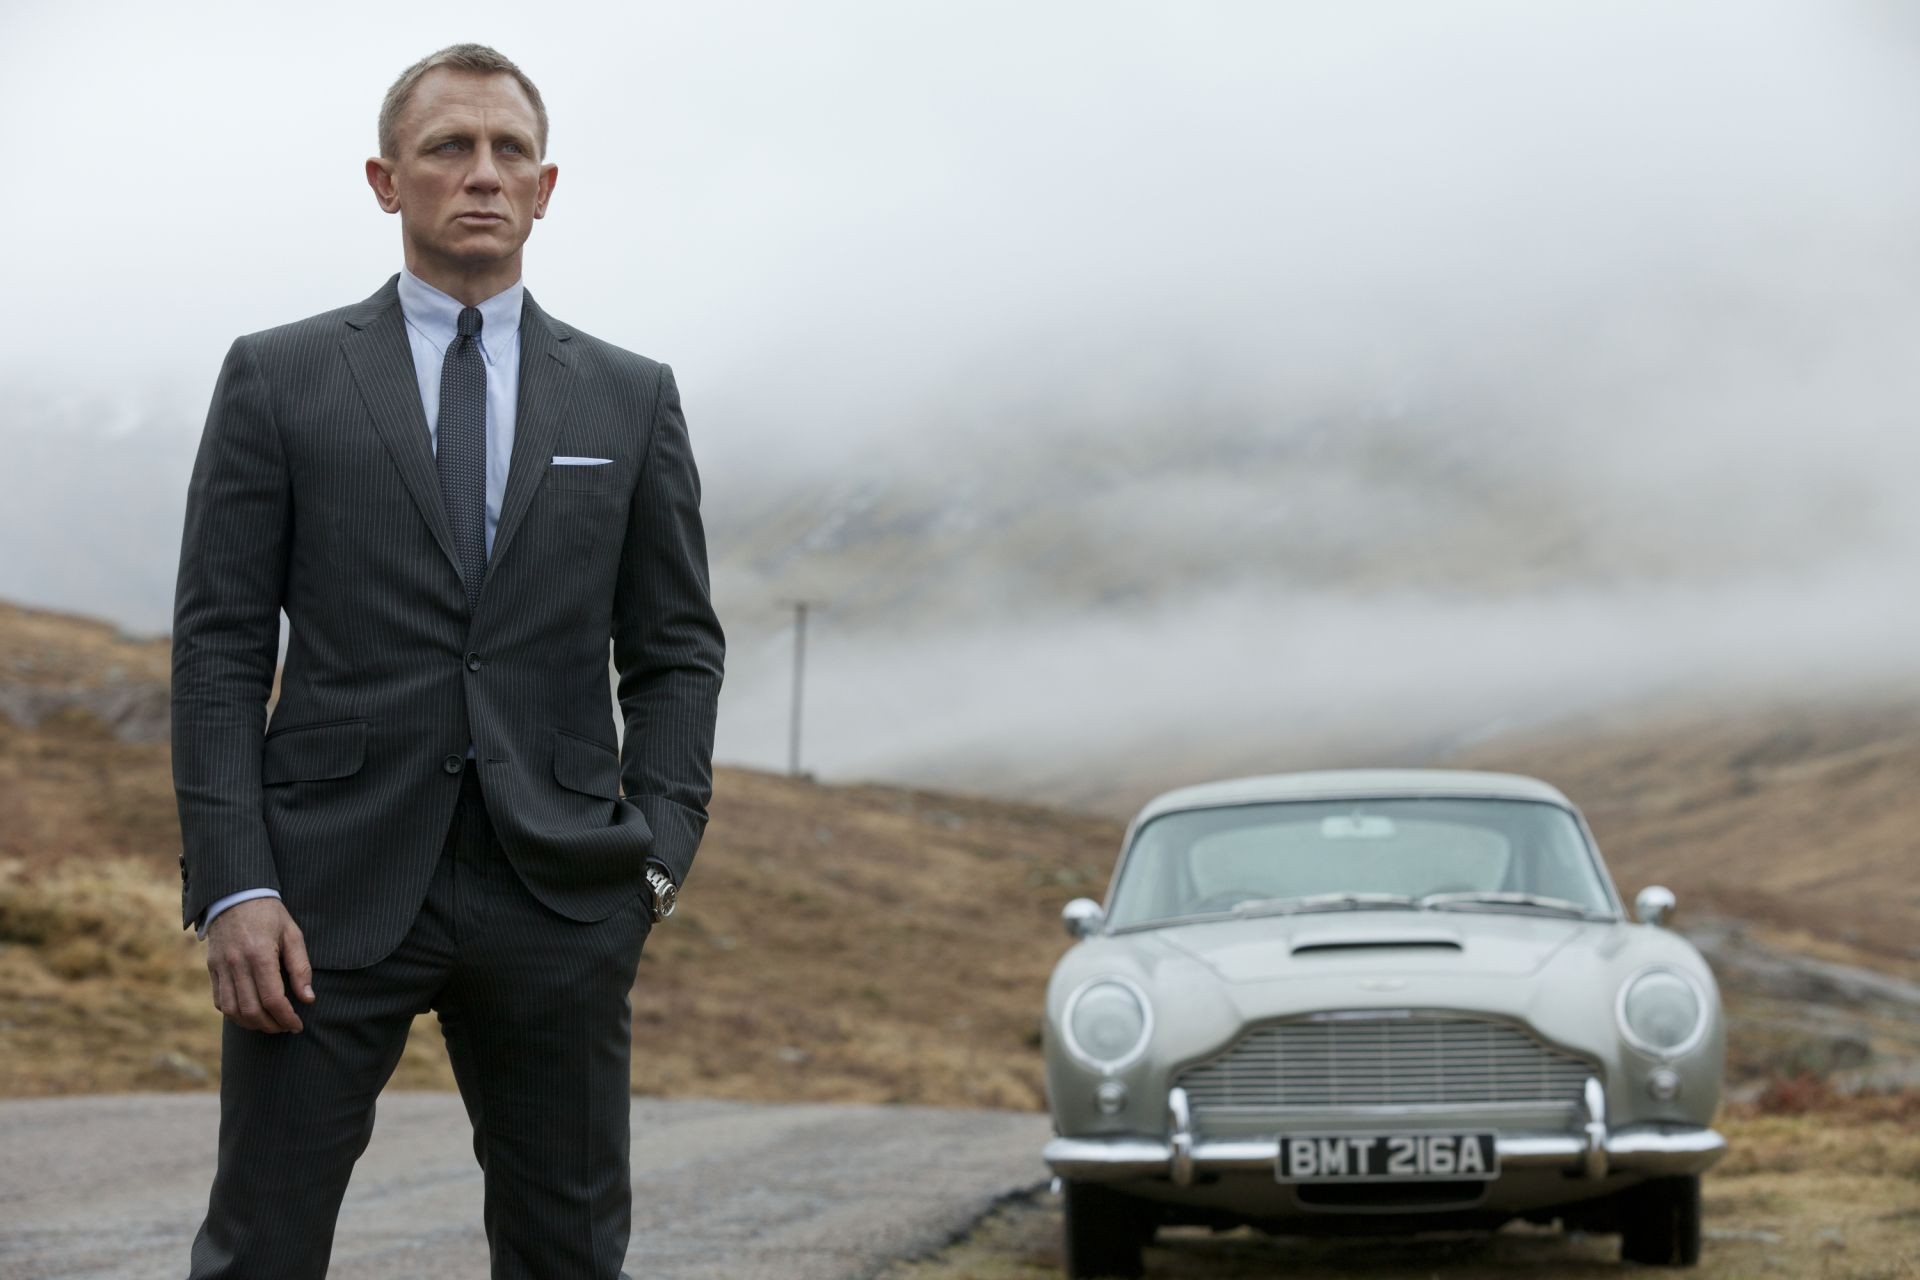 Daniel Craig stars as James Bond in Columbia Pictures' Skyfall (2012). Photo credit by Francois Duhamel.